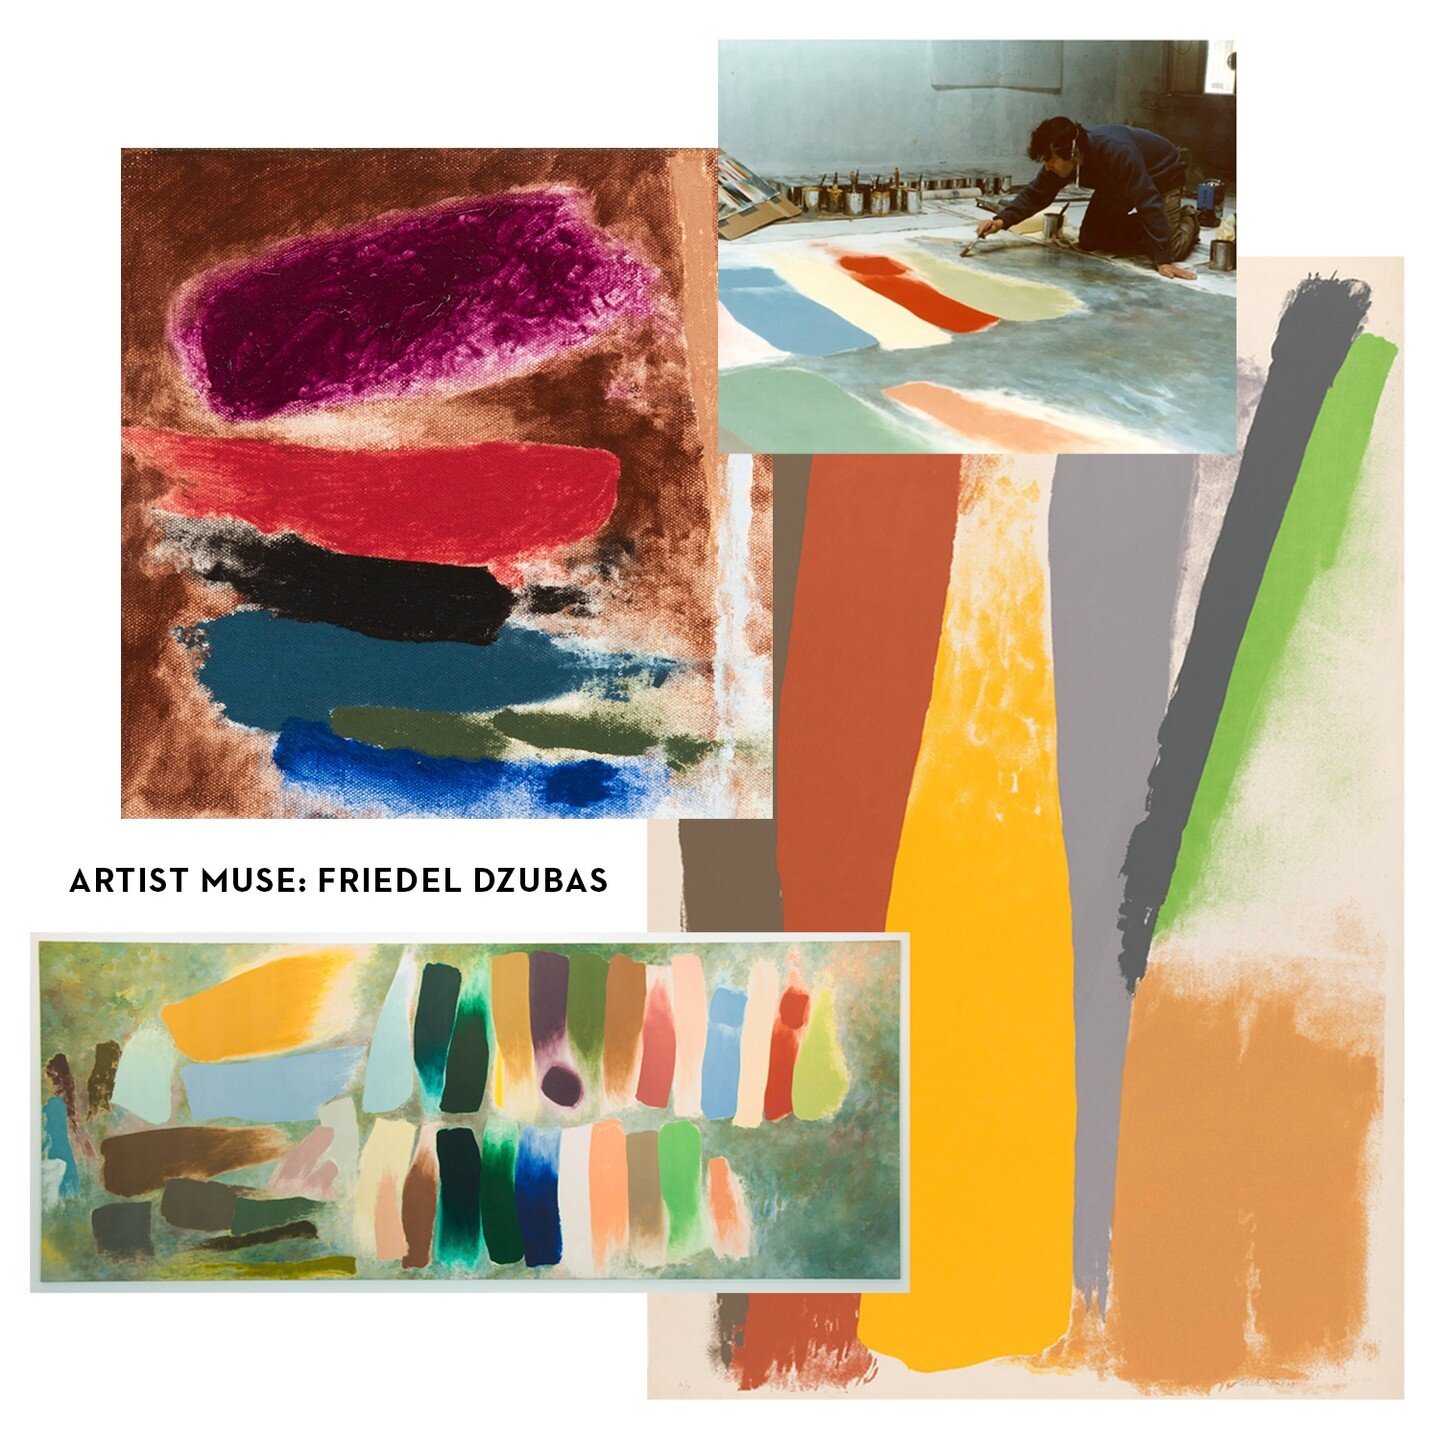 Artist Muse: Friedel Dzubas

Friedel Dzubas was a German-born American Abstract Expressionist painter. Dzubas was part of the abstract expressionist movement, which flourished in the 1950s and 1960s. His works often featured bold use of color and pow